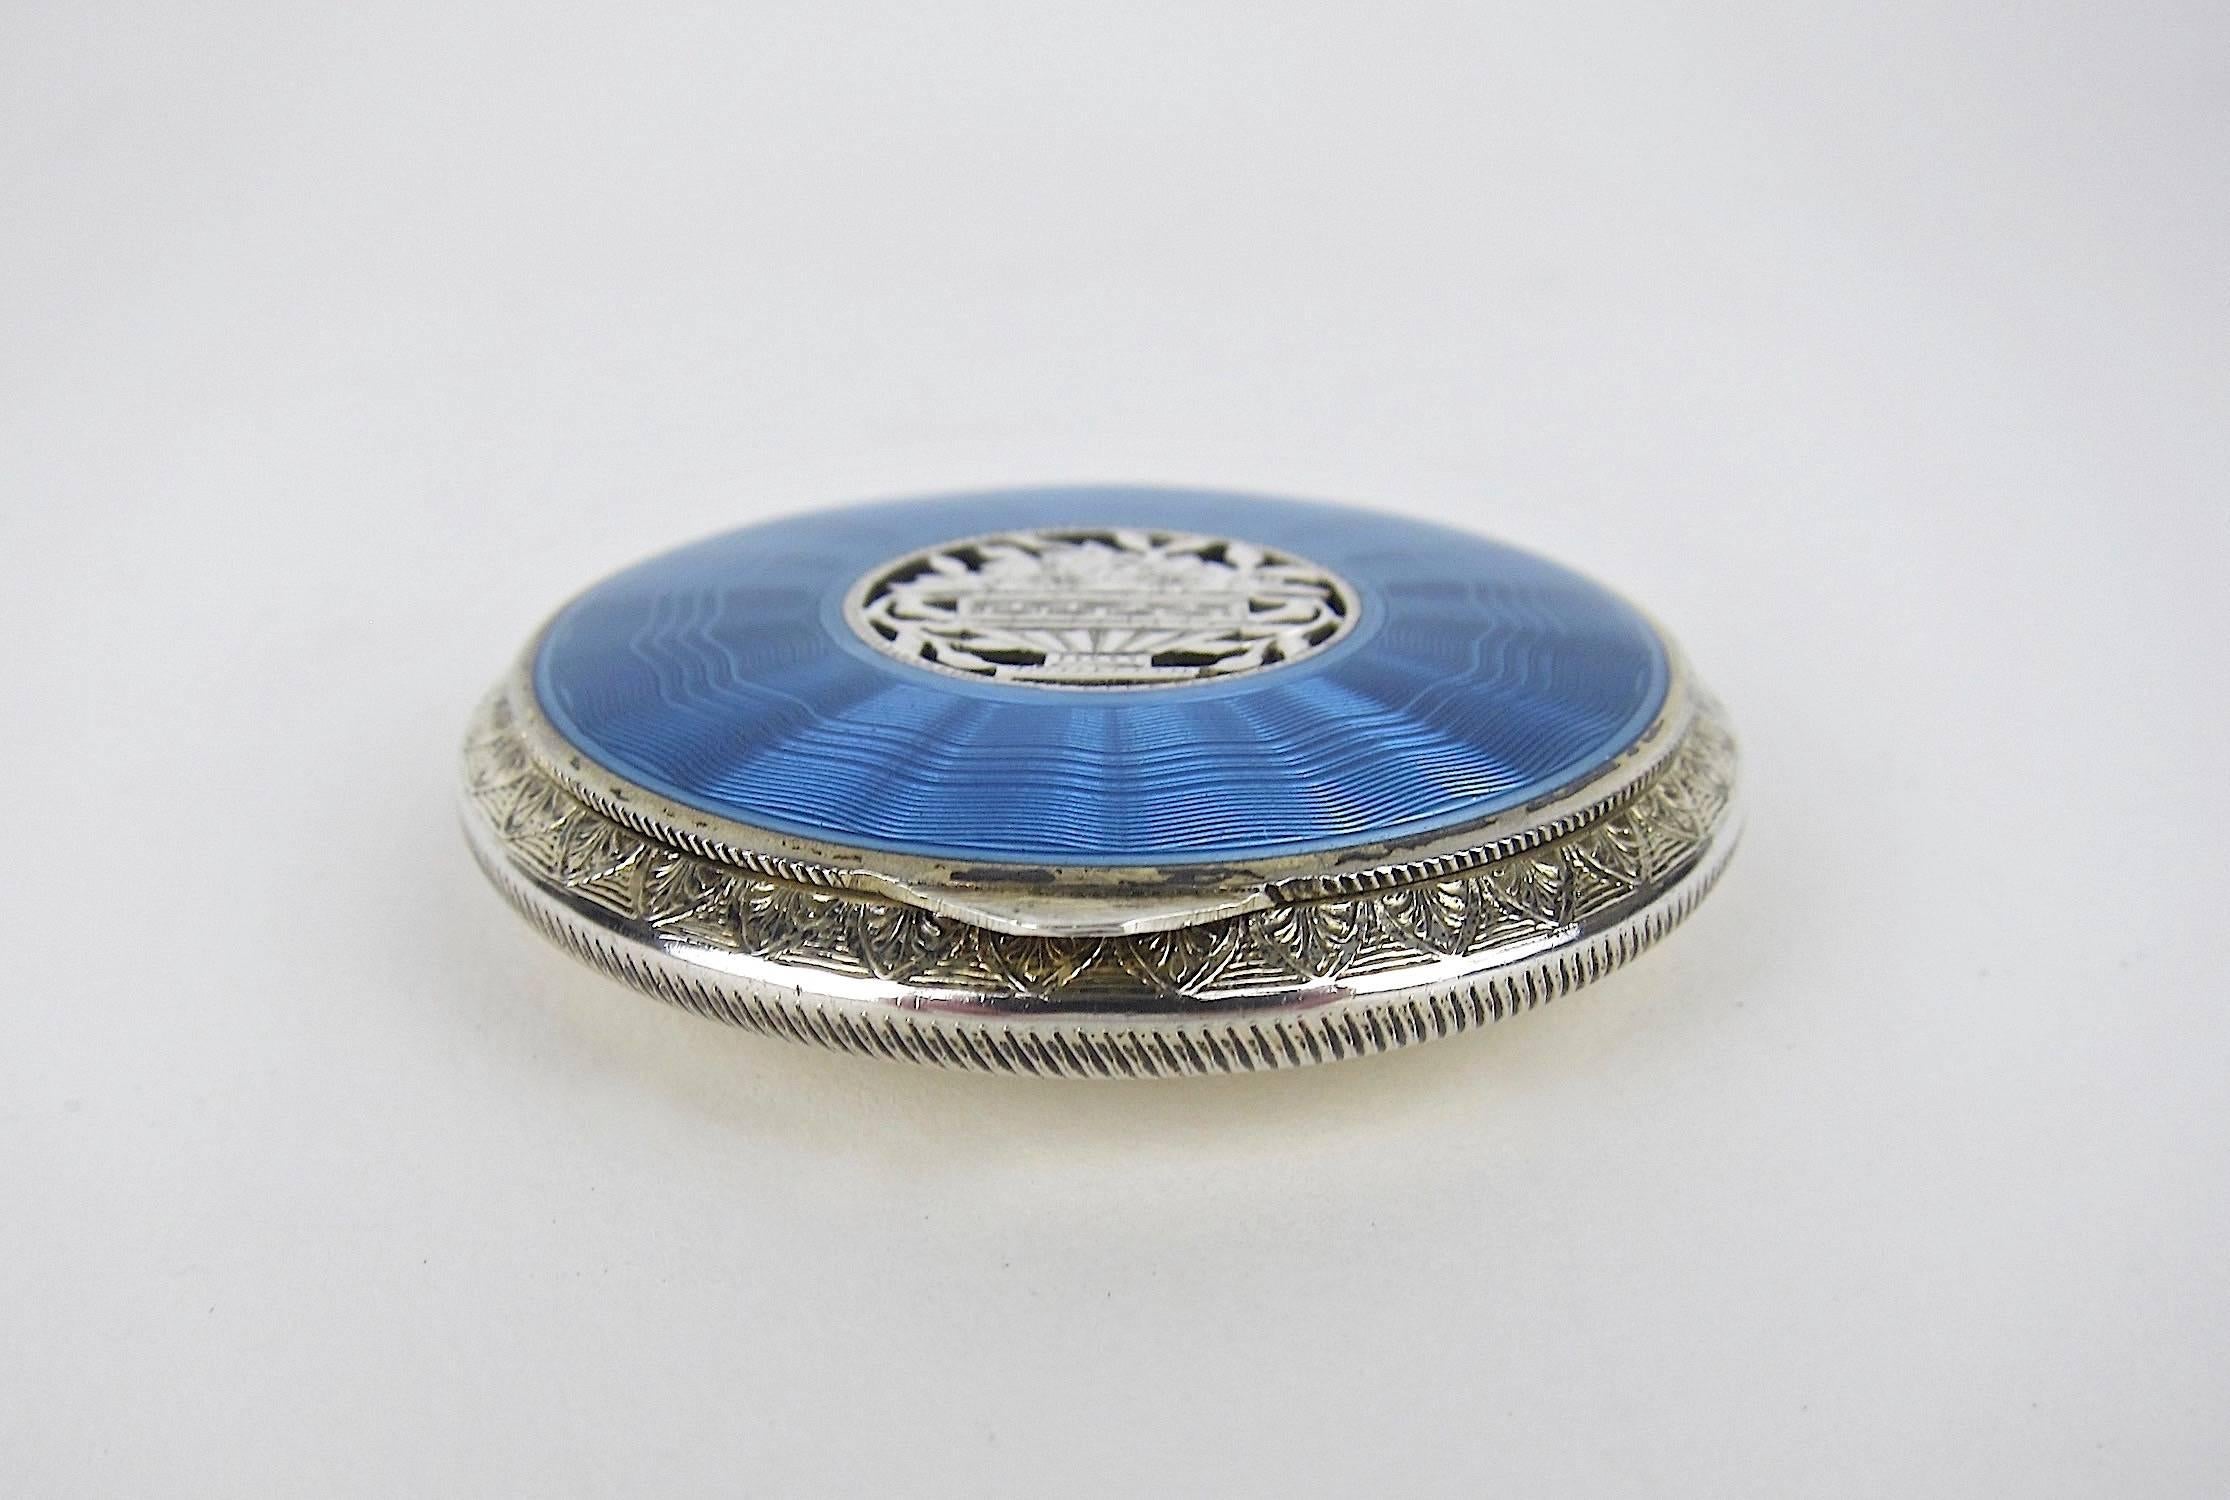 Enameled Antique Austrian Sterling Silver and Guilloche Enamel Compact